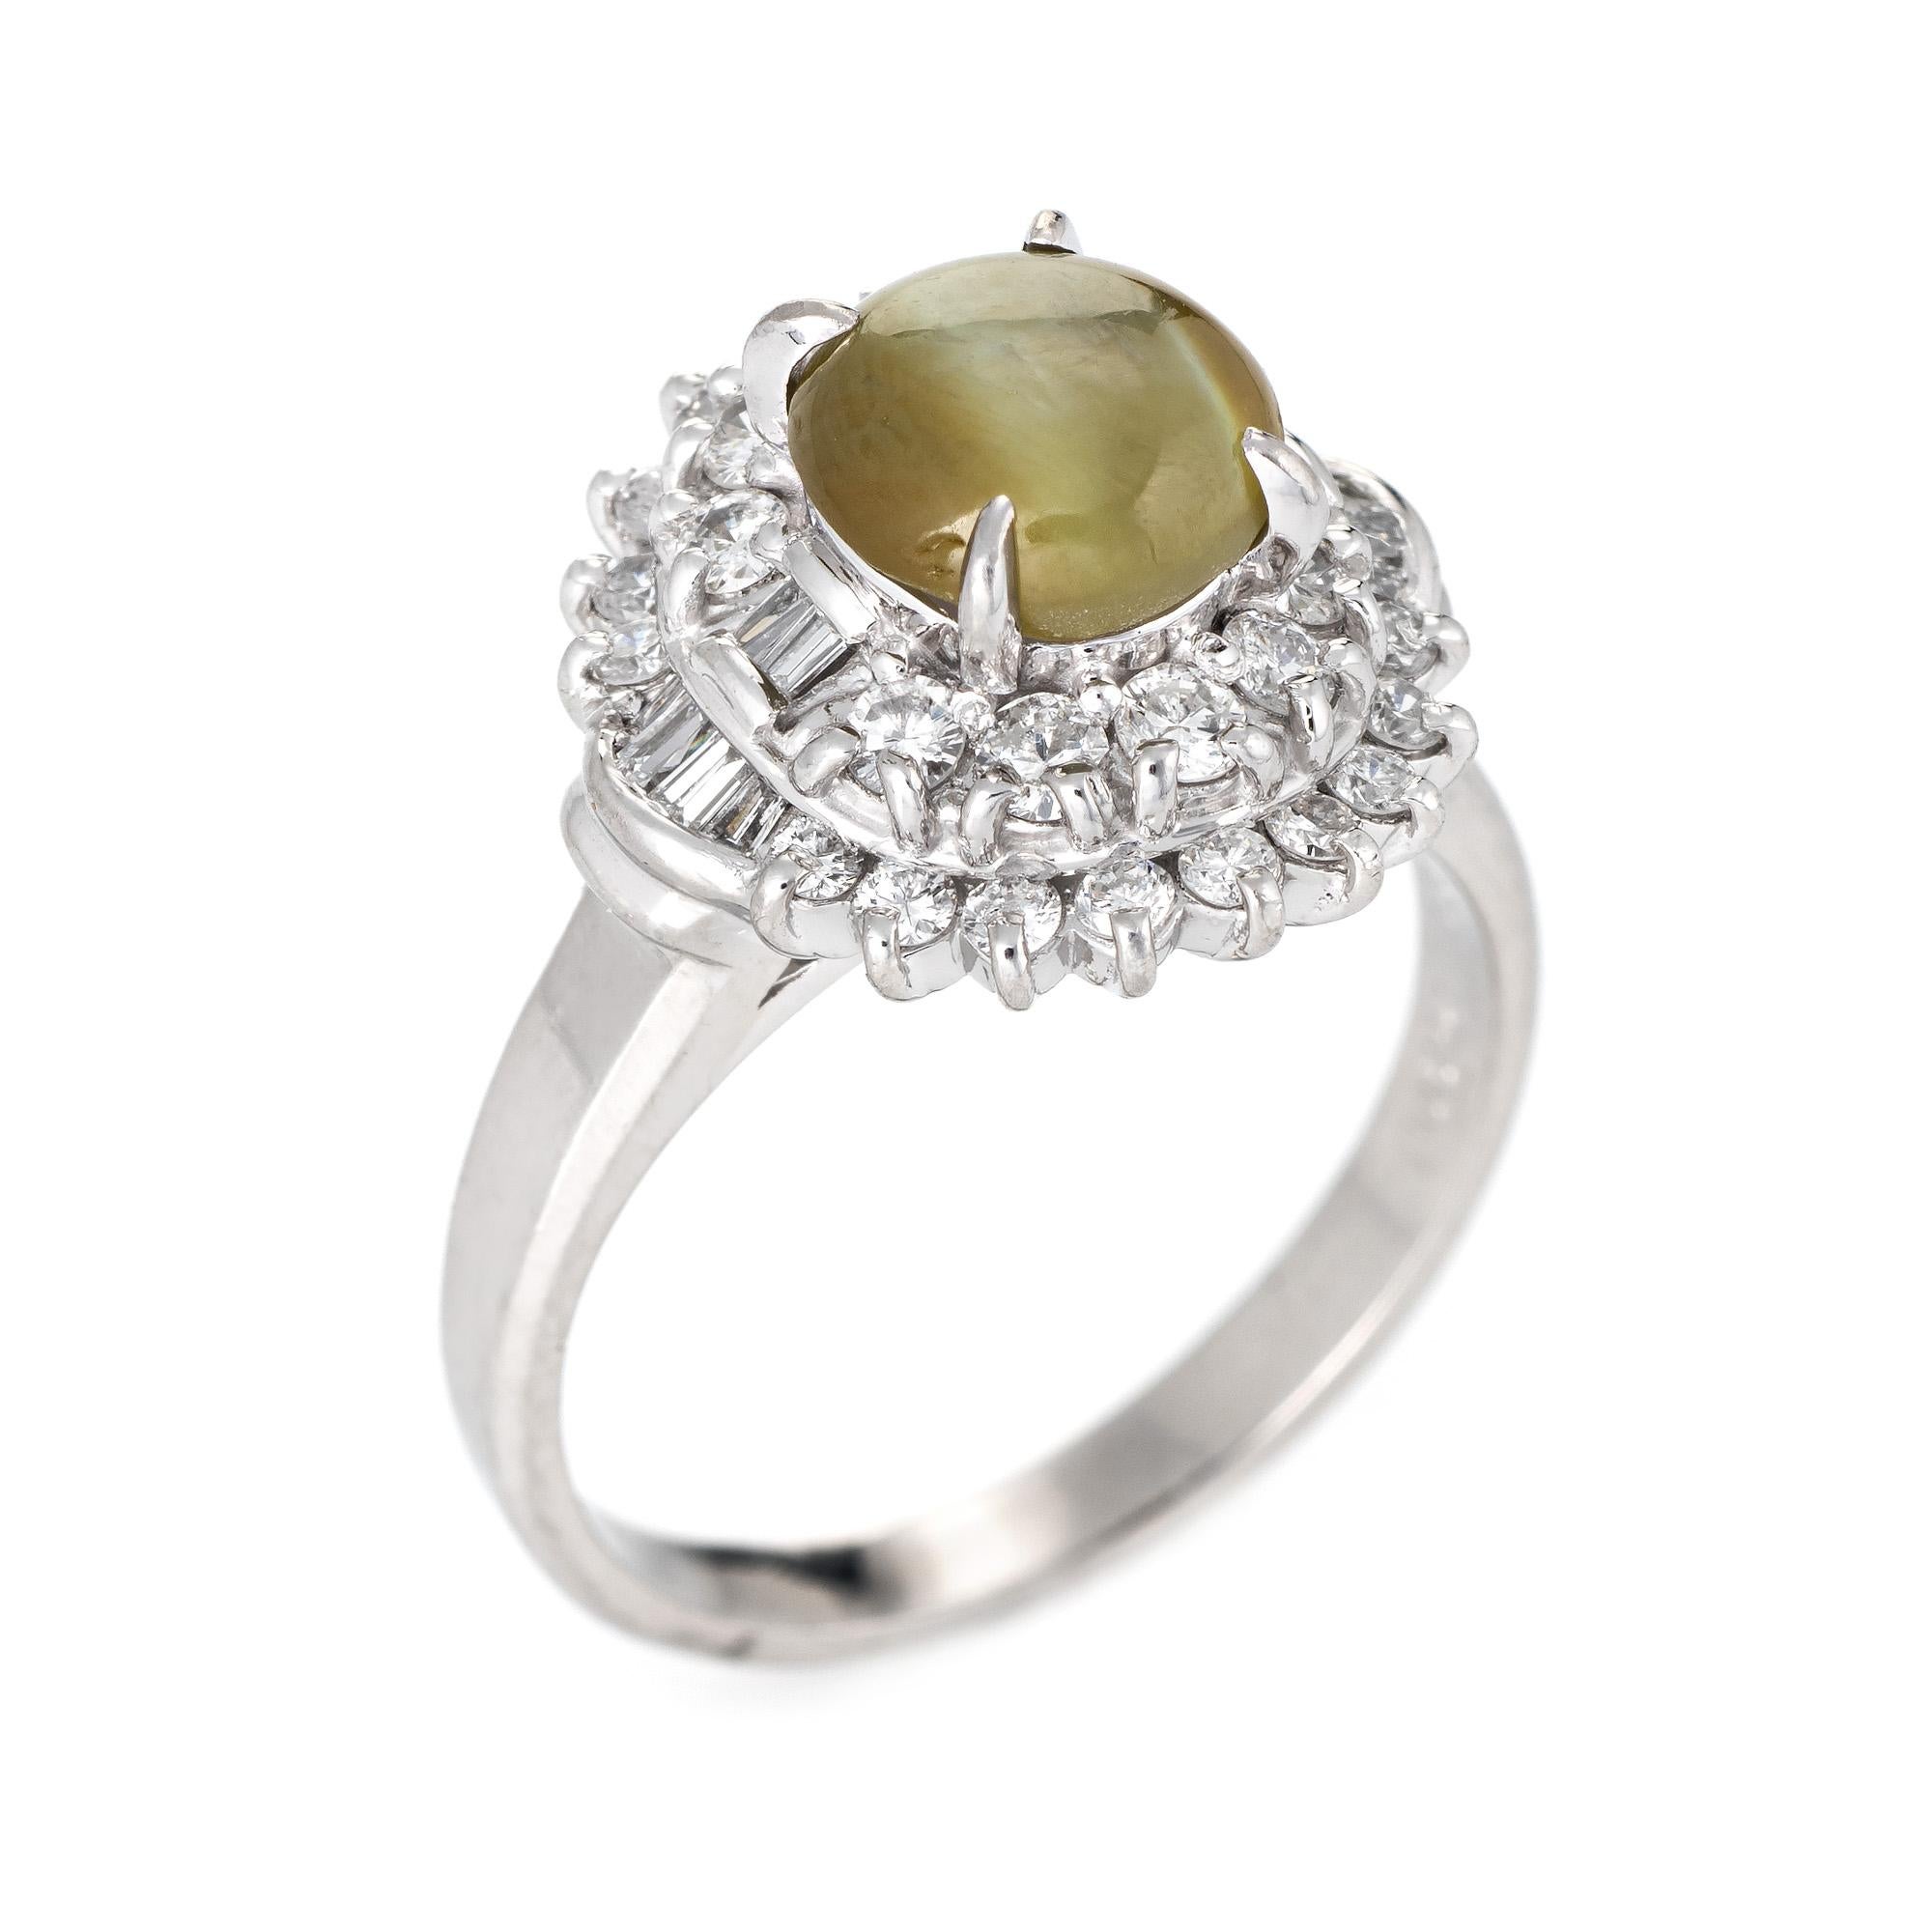 Stylish cat's eye chrysoberyl cocktail ring crafted in 900 platinum. 

Cat's eye chrysoberyl measures 8mm x 6.5mm (2.21 carats), accented with 0.73 carats of mixed cut diamonds (estimated at G-H color and SI1-2 clarity). The cat's eye is in